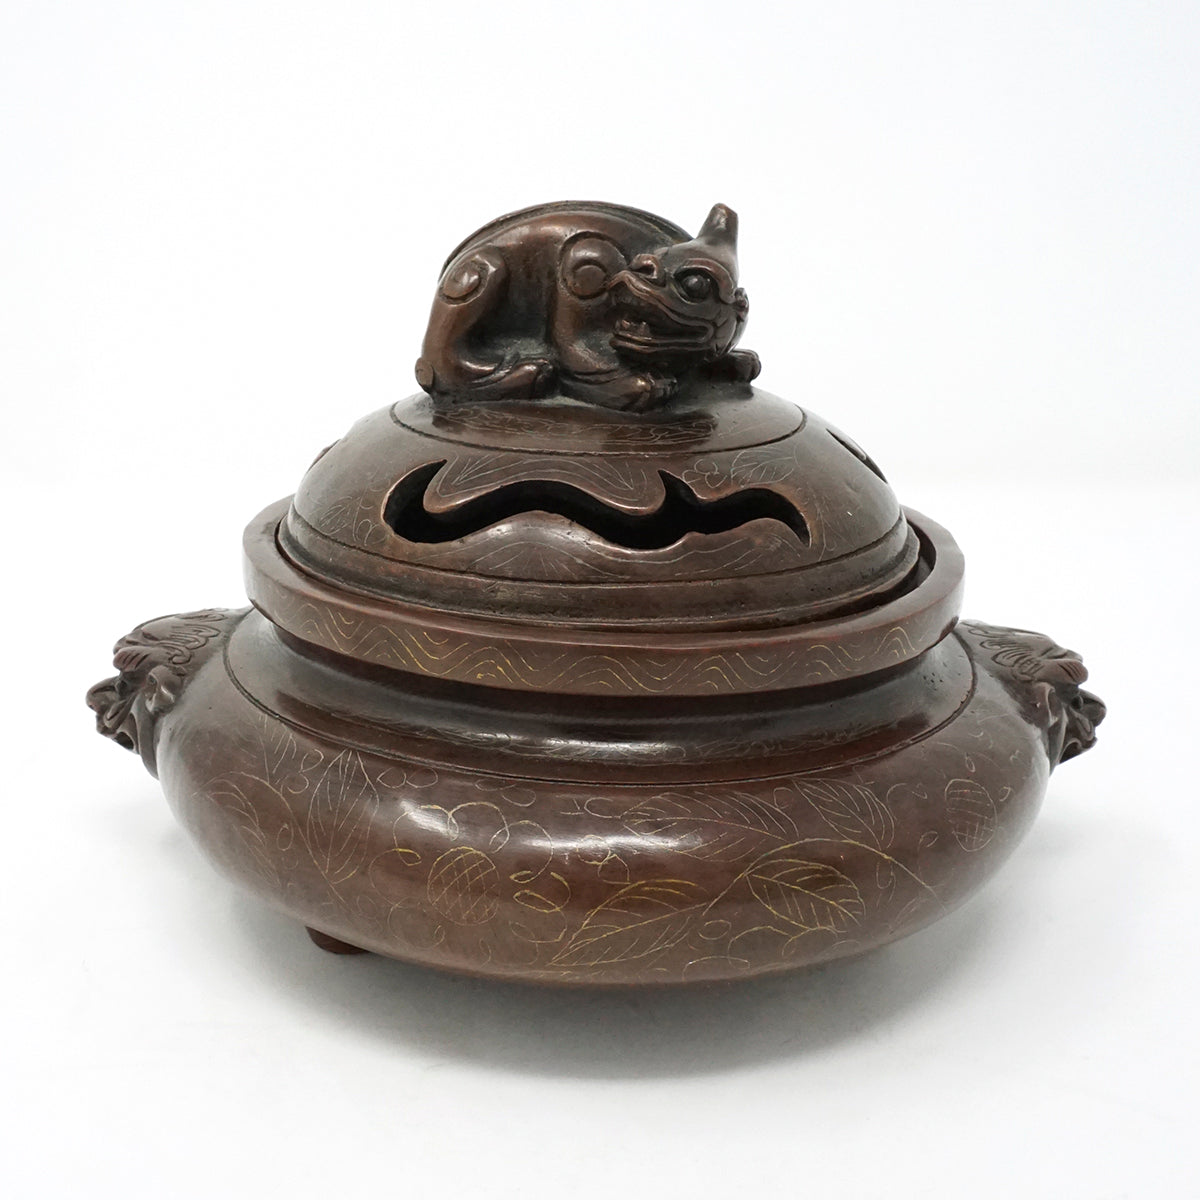 Chinese Bronze Incense Burner by Xuande Emperor Mark with Inlaid Design